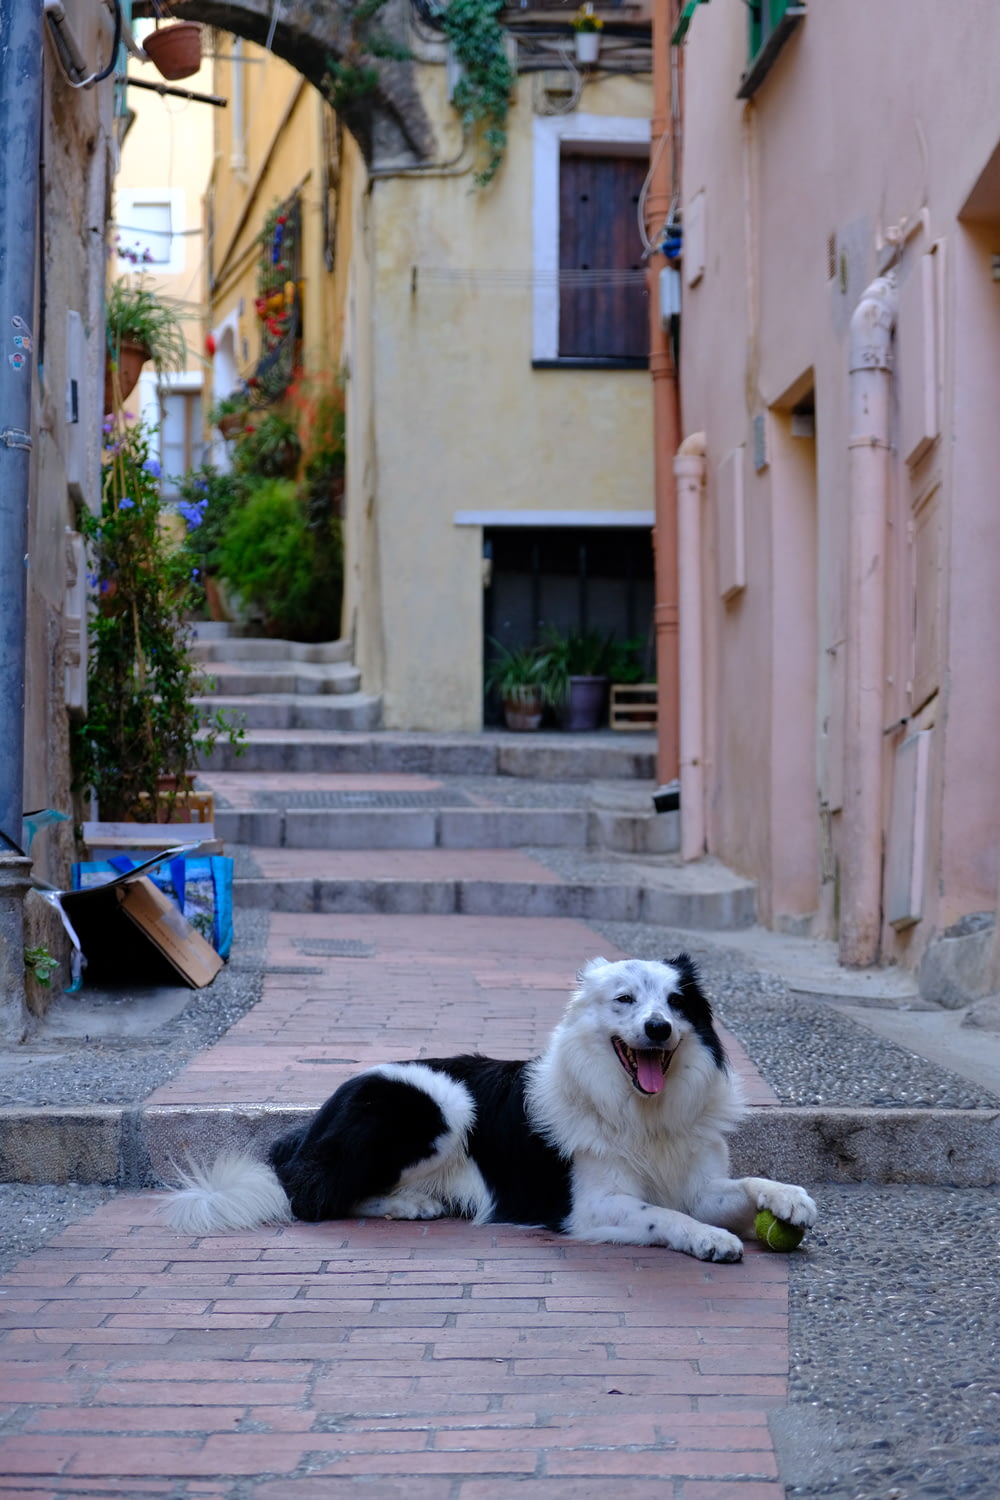 a black and white dog laying on a brick street